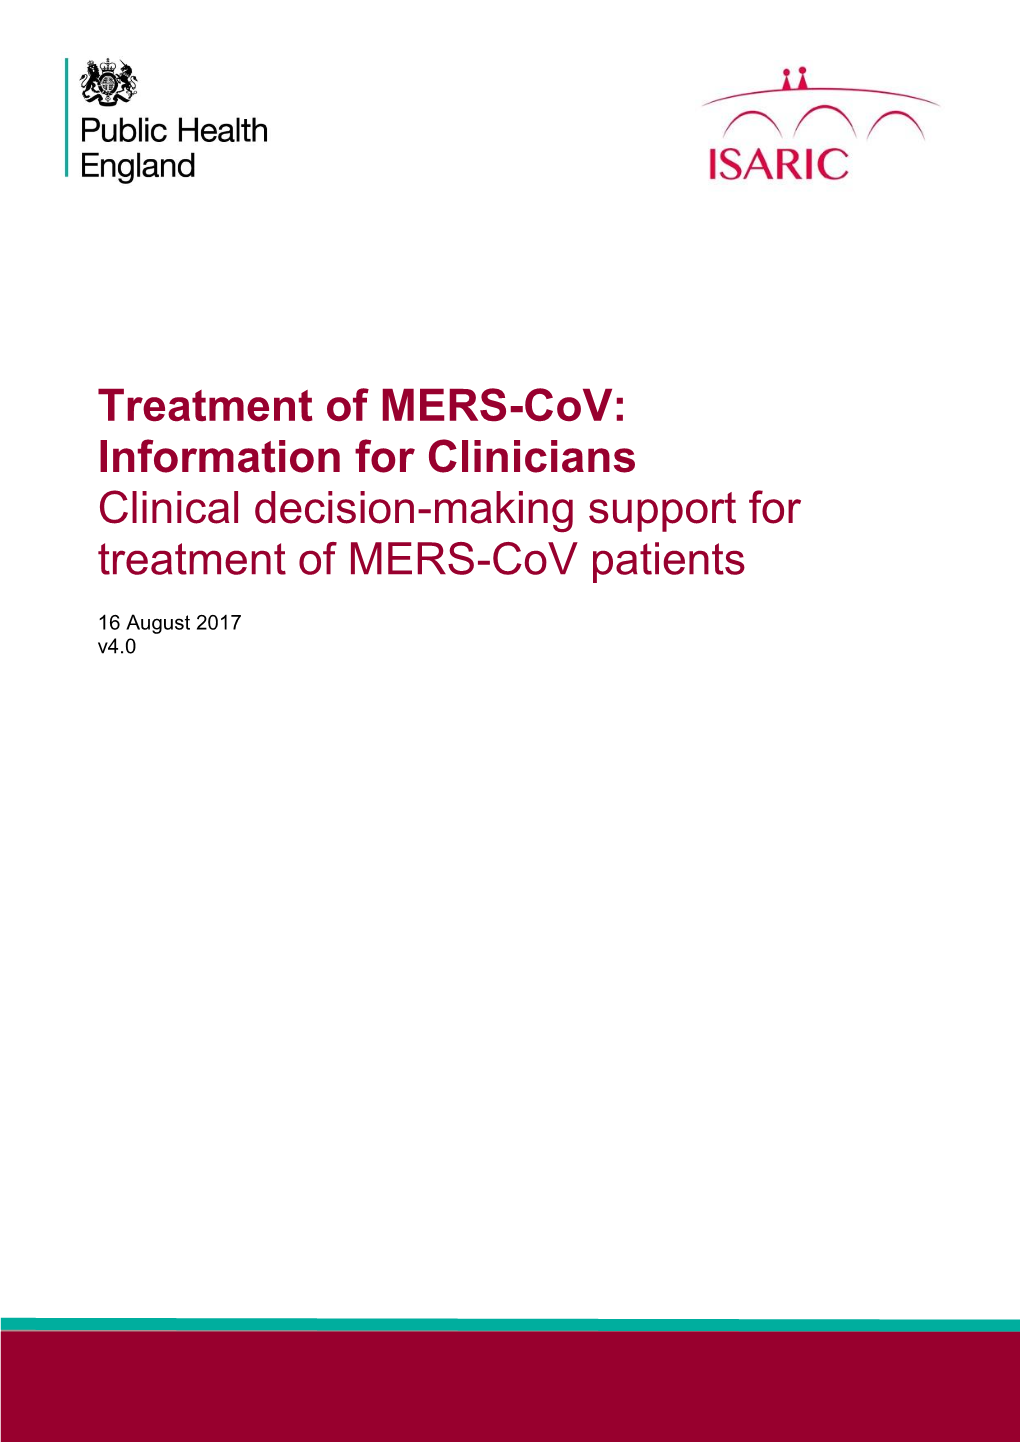 Treatment of MERS-Cov: Information for Clinicians Clinical Decision-Making Support for Treatment of MERS-Cov Patients